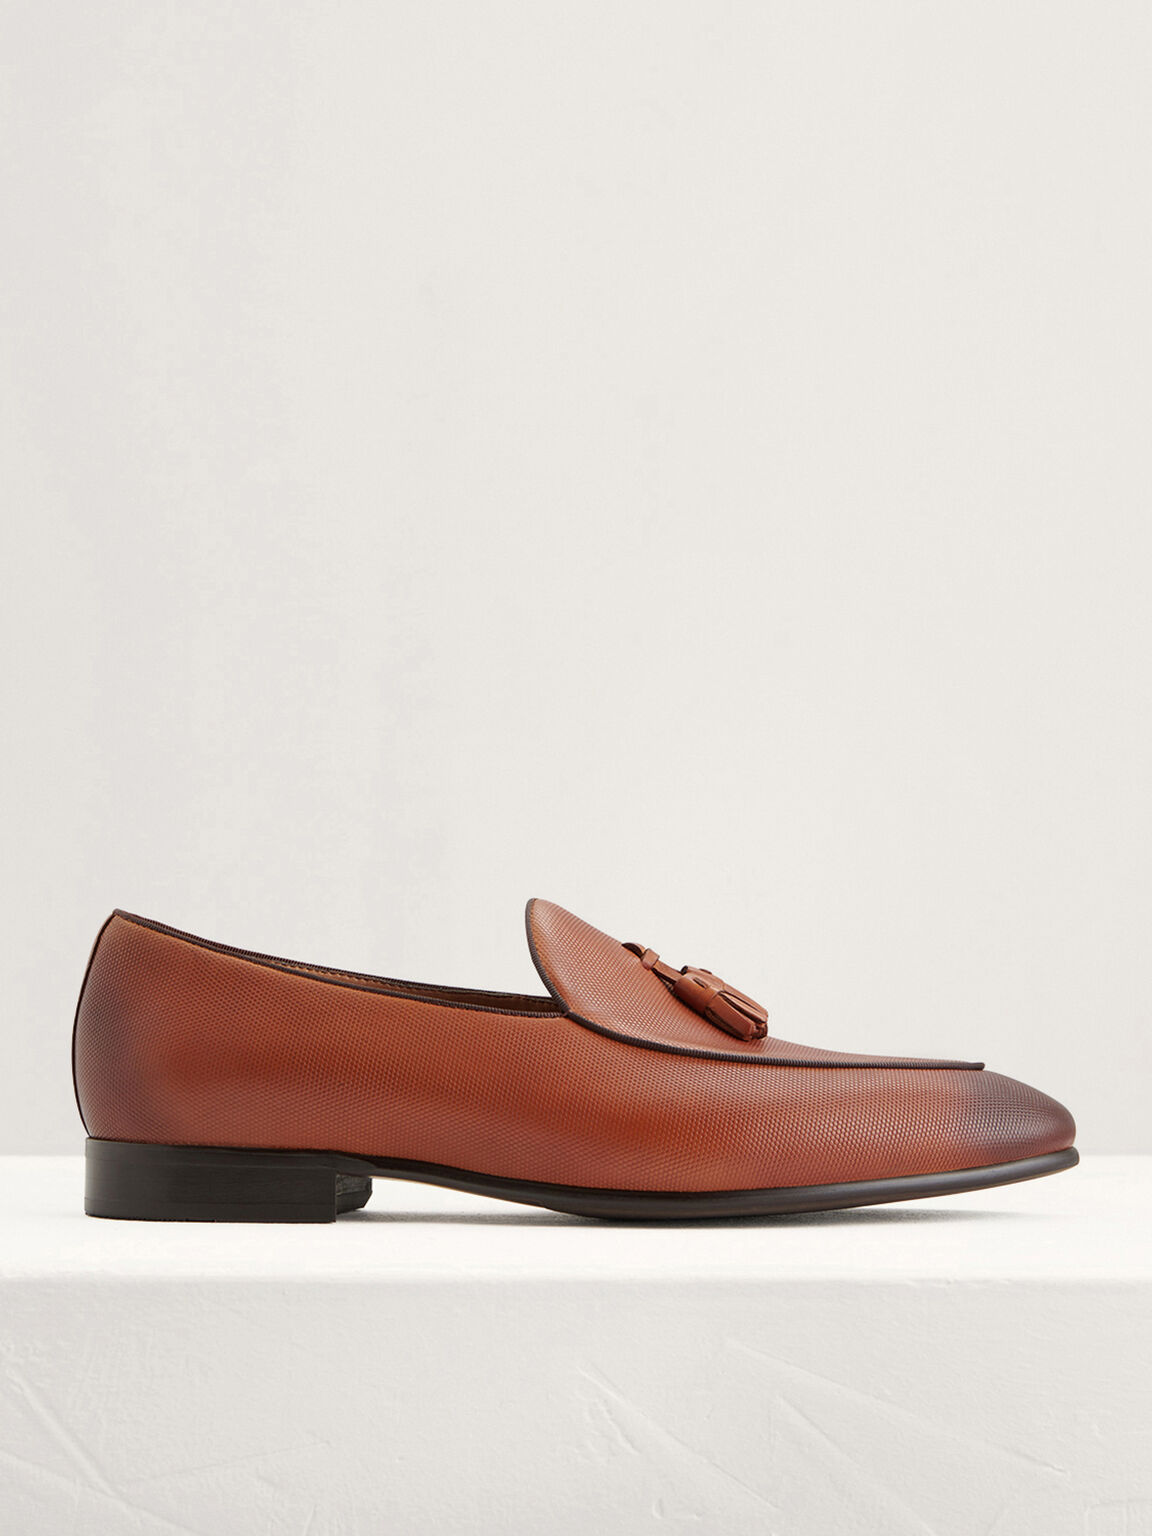 Leather Tasselled Loafers, Cognac